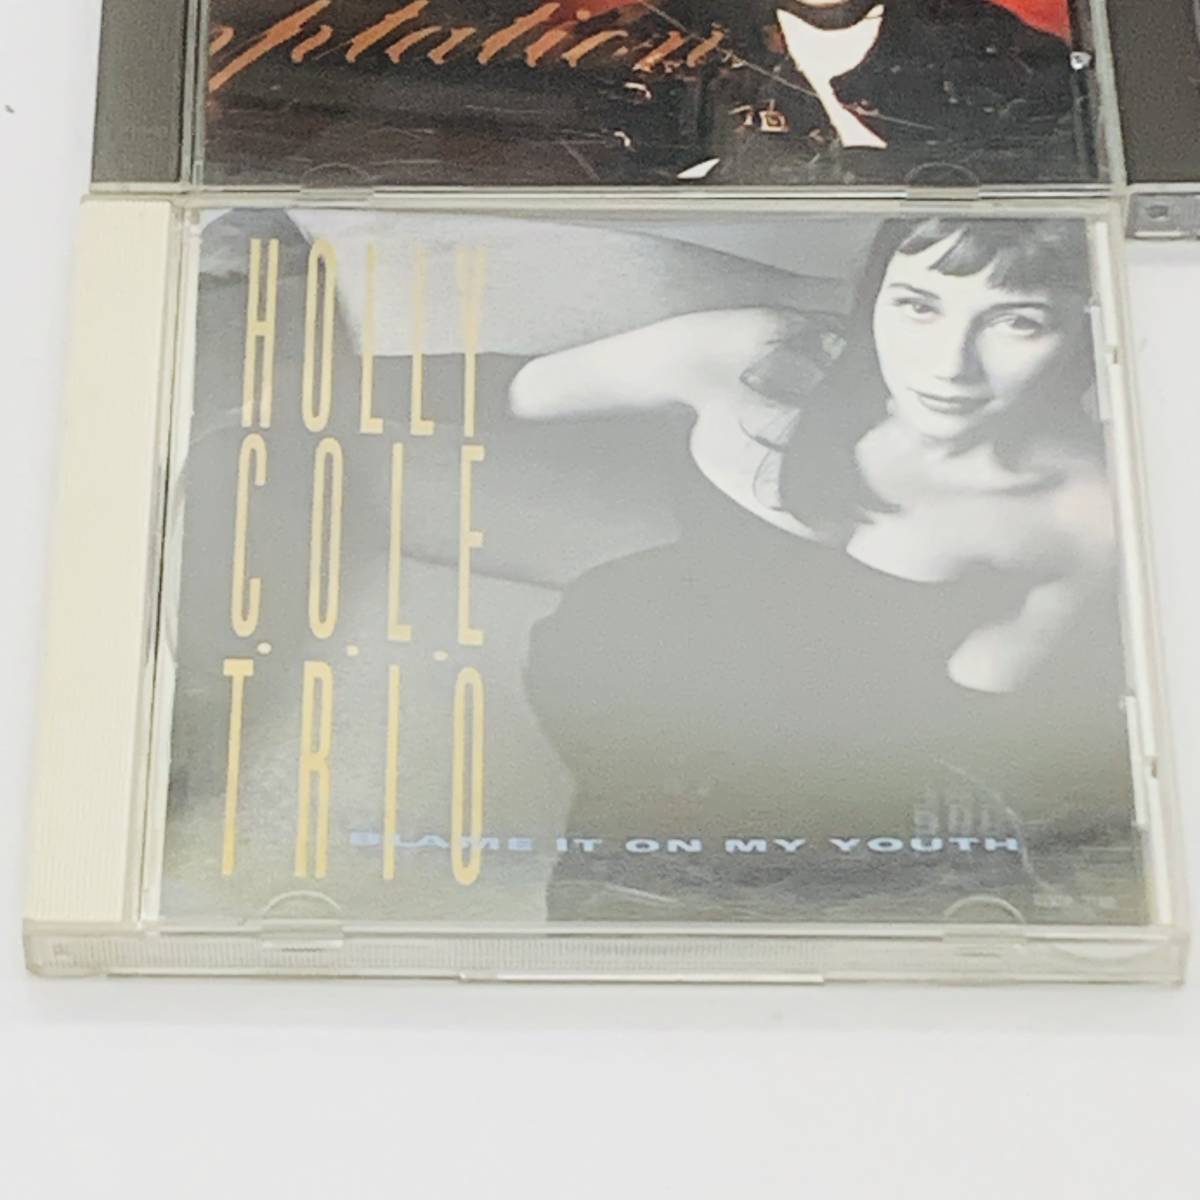 【HOLLY COLE】 TRIO CD DON'T SOMKE BED temptation BLAME IT ON MY YOUTH MANHATTAN 3枚 セット まとめの画像2